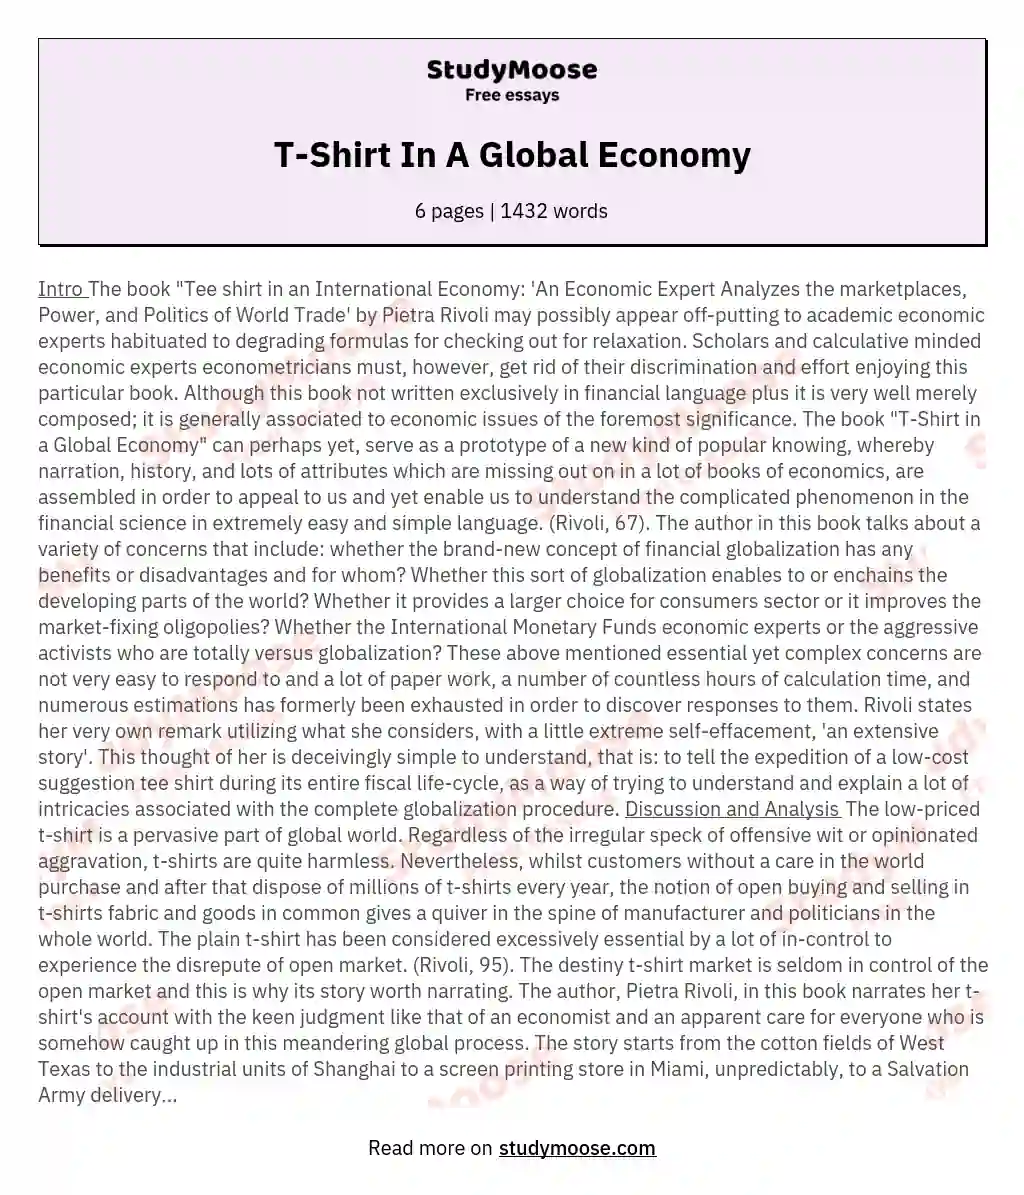 T-Shirt In A Global Economy